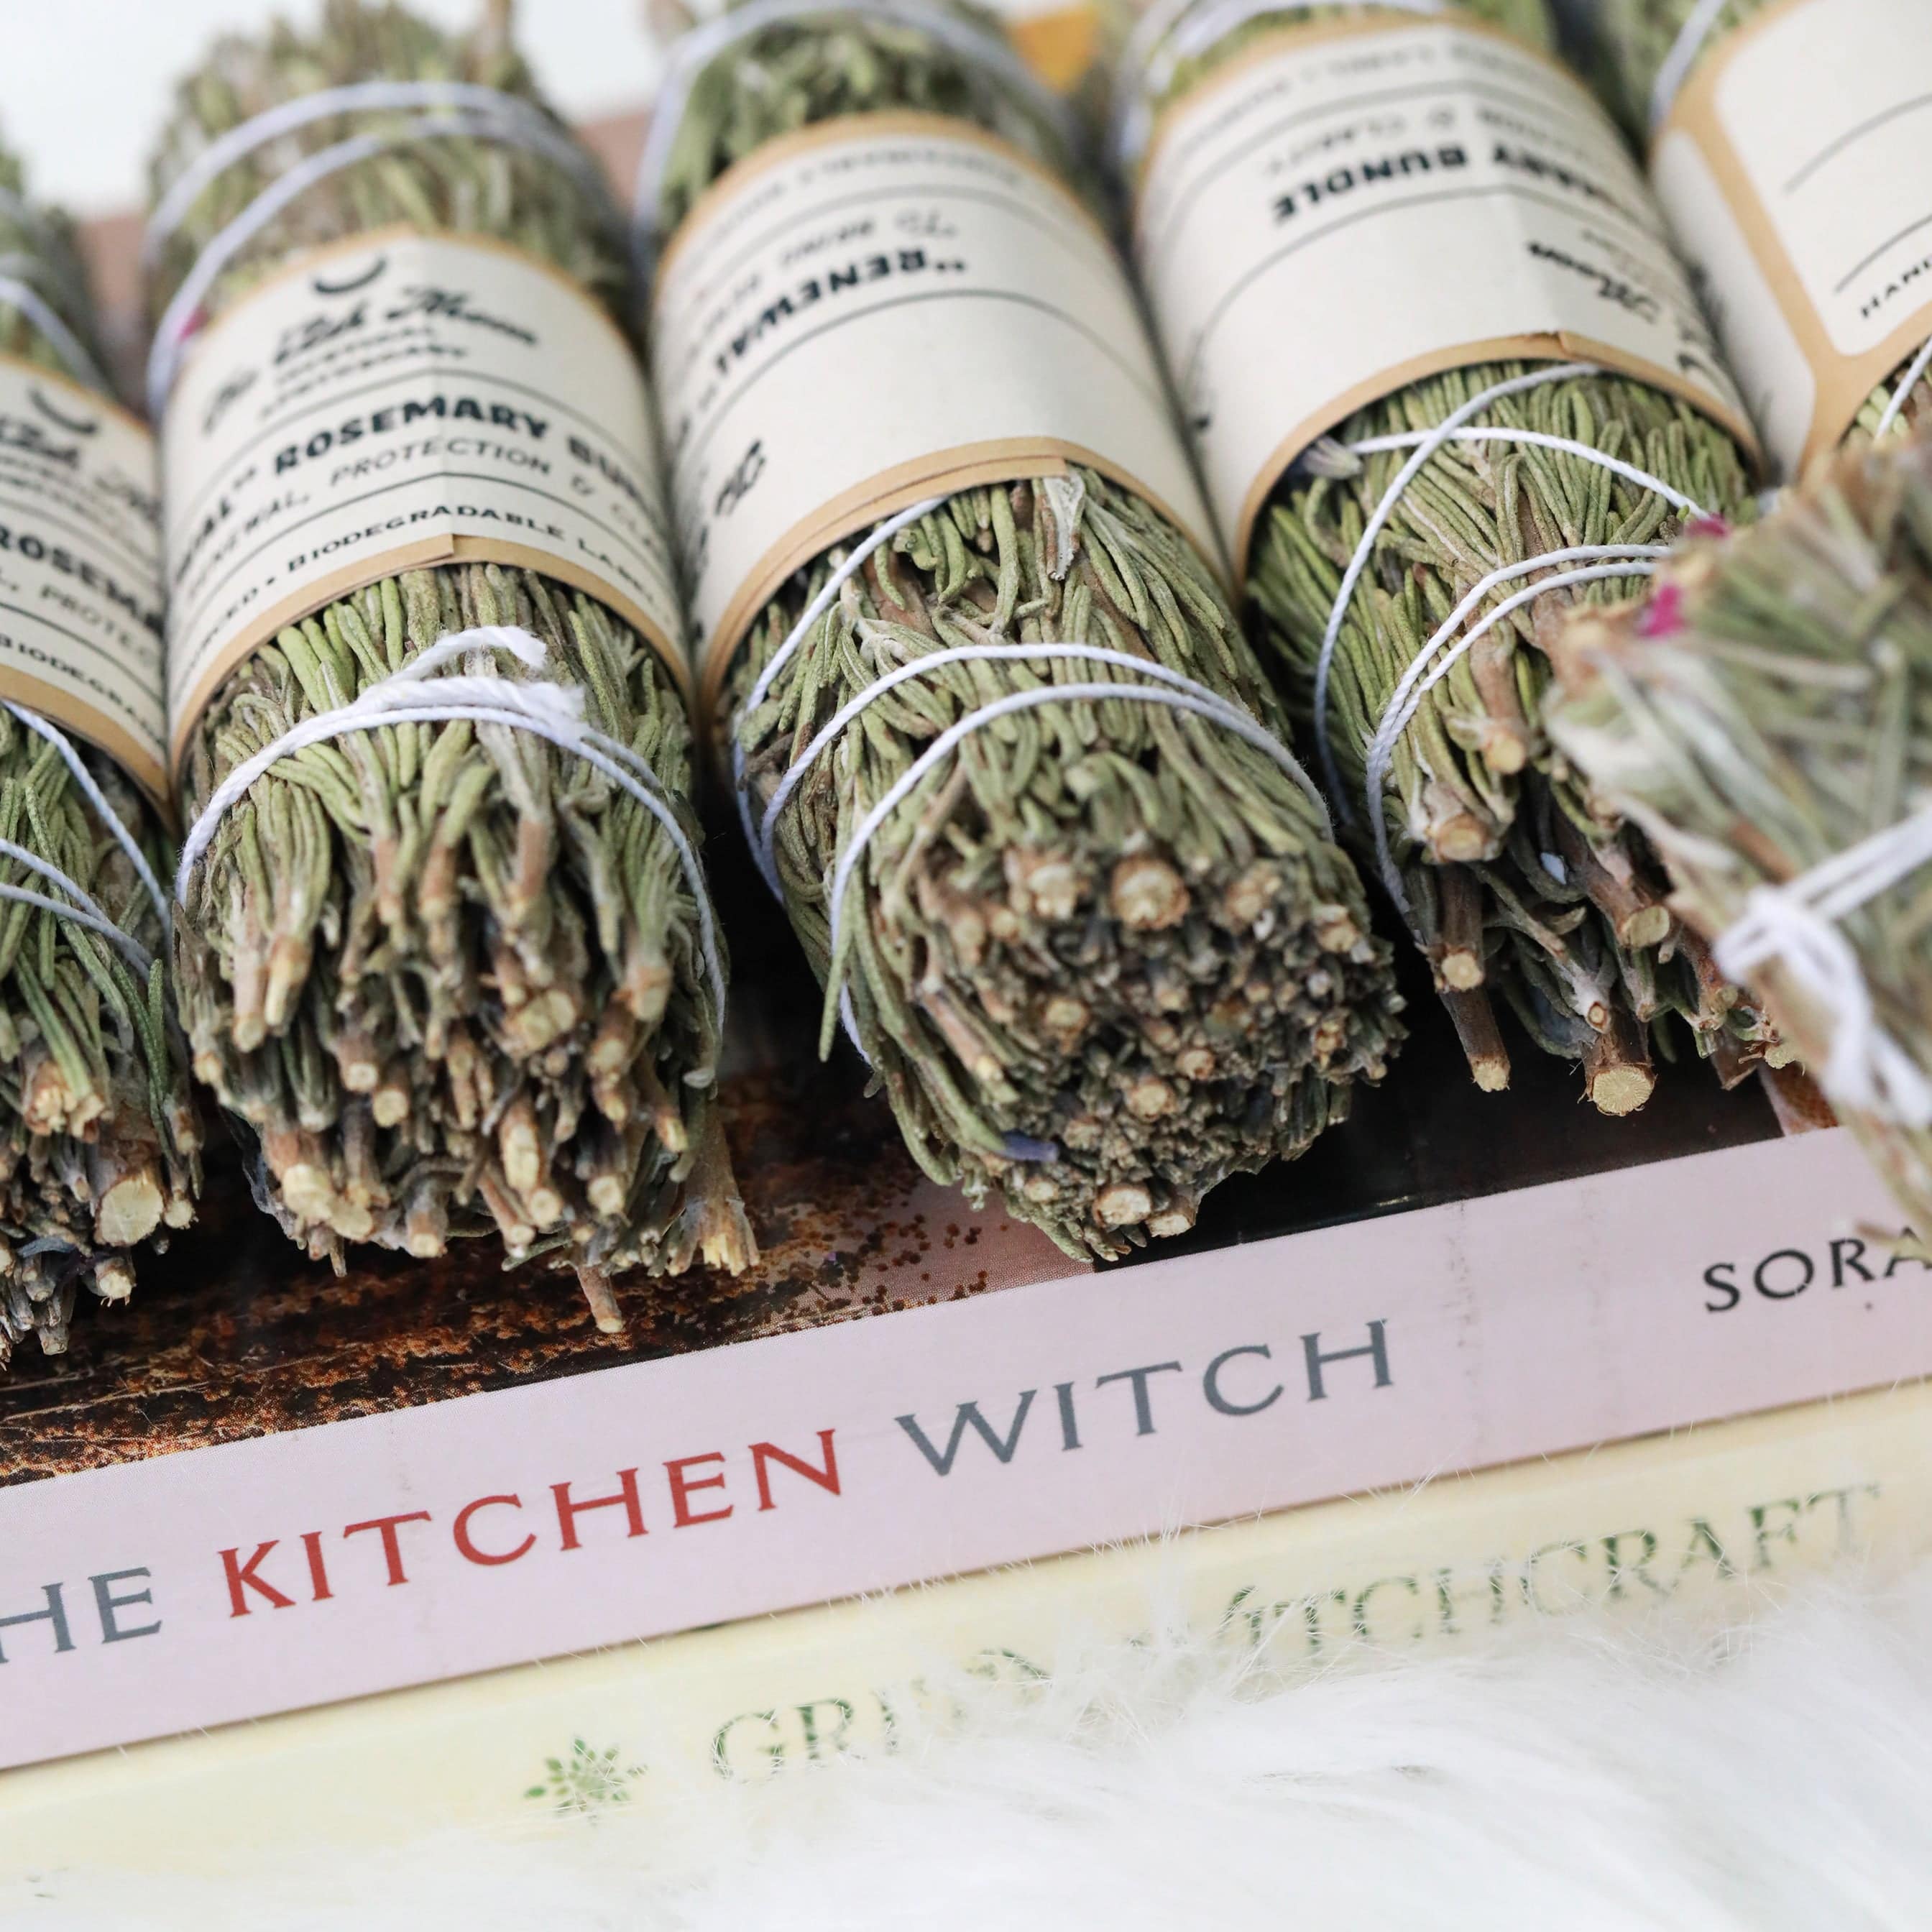 Rosemary "Renewal" Smudge Bundle - The Gilded Witch